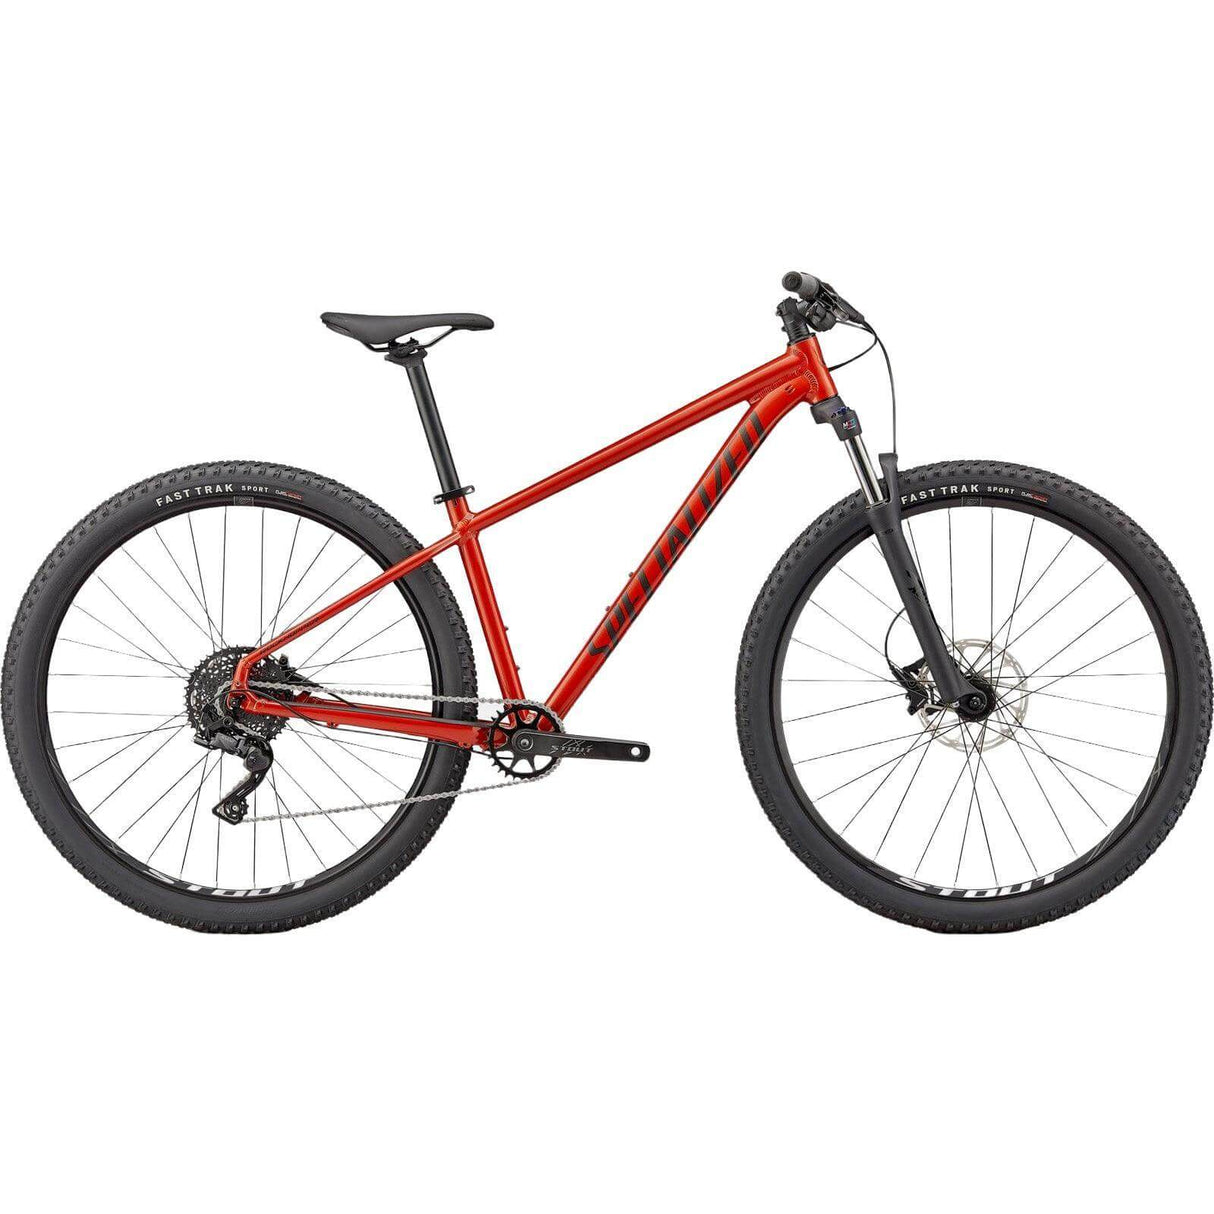 Specialized Rockhopper Comp 29 | Strictly Bicycles